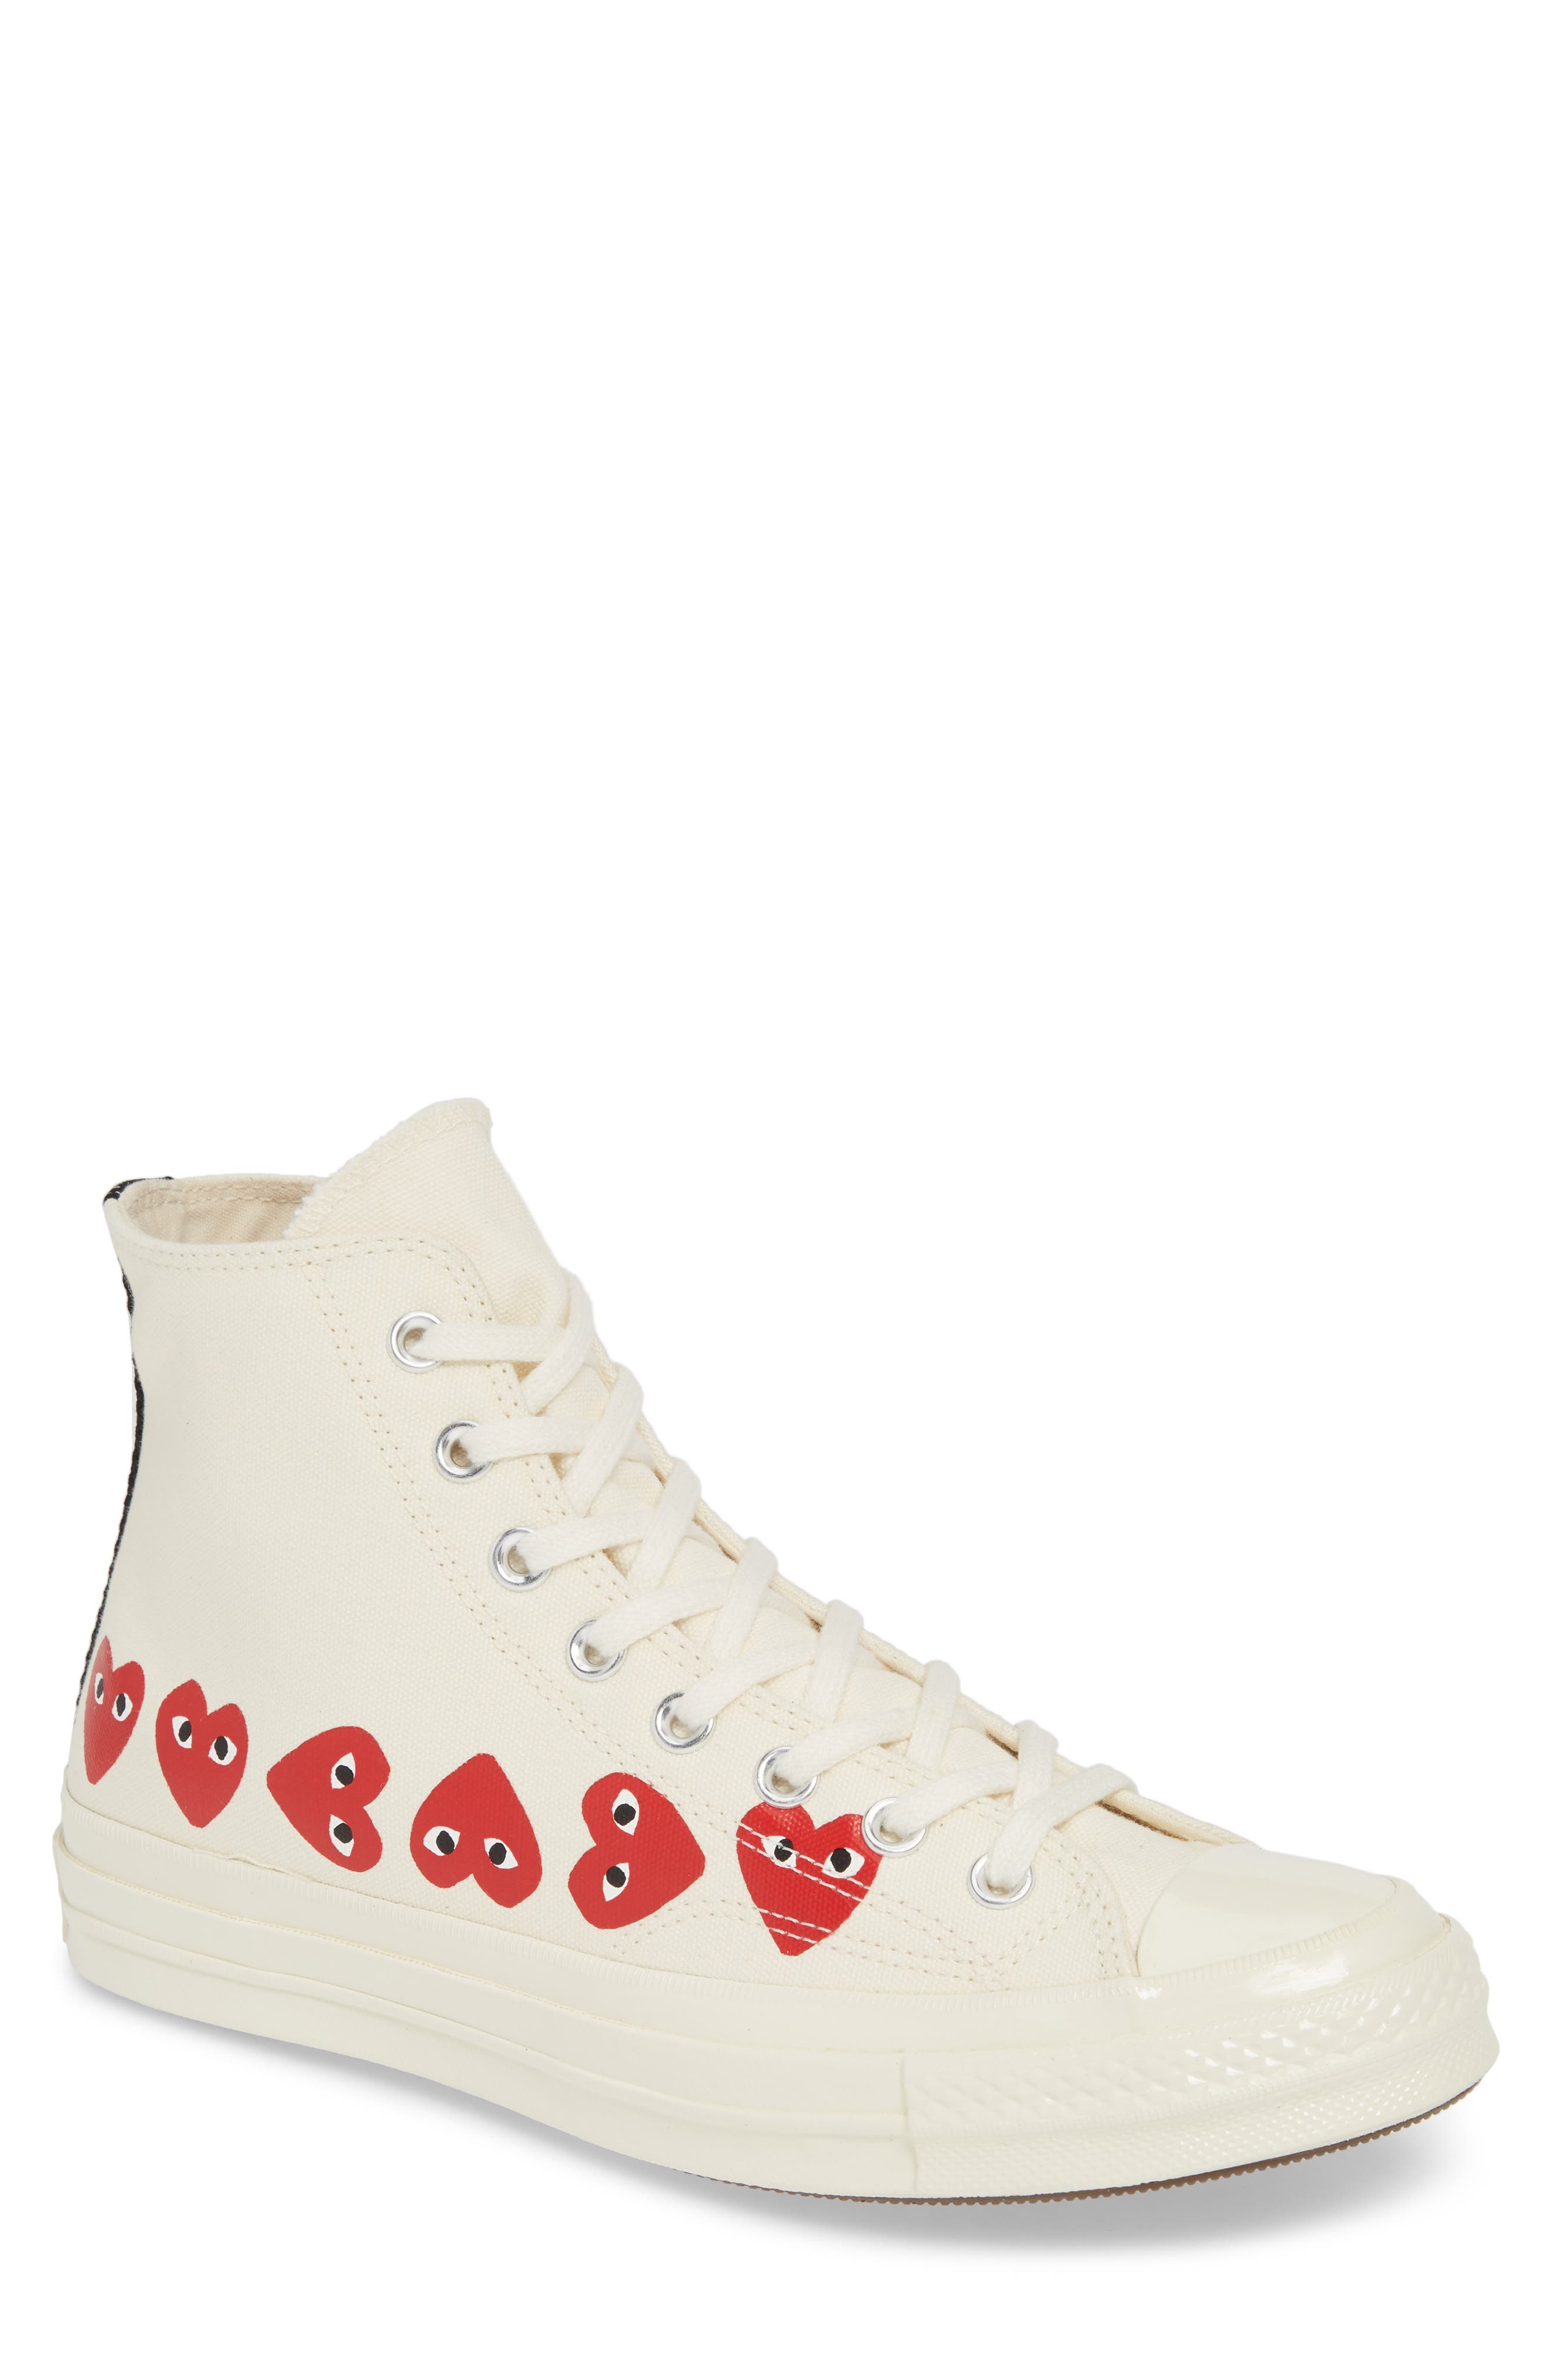 cdg converse size 13